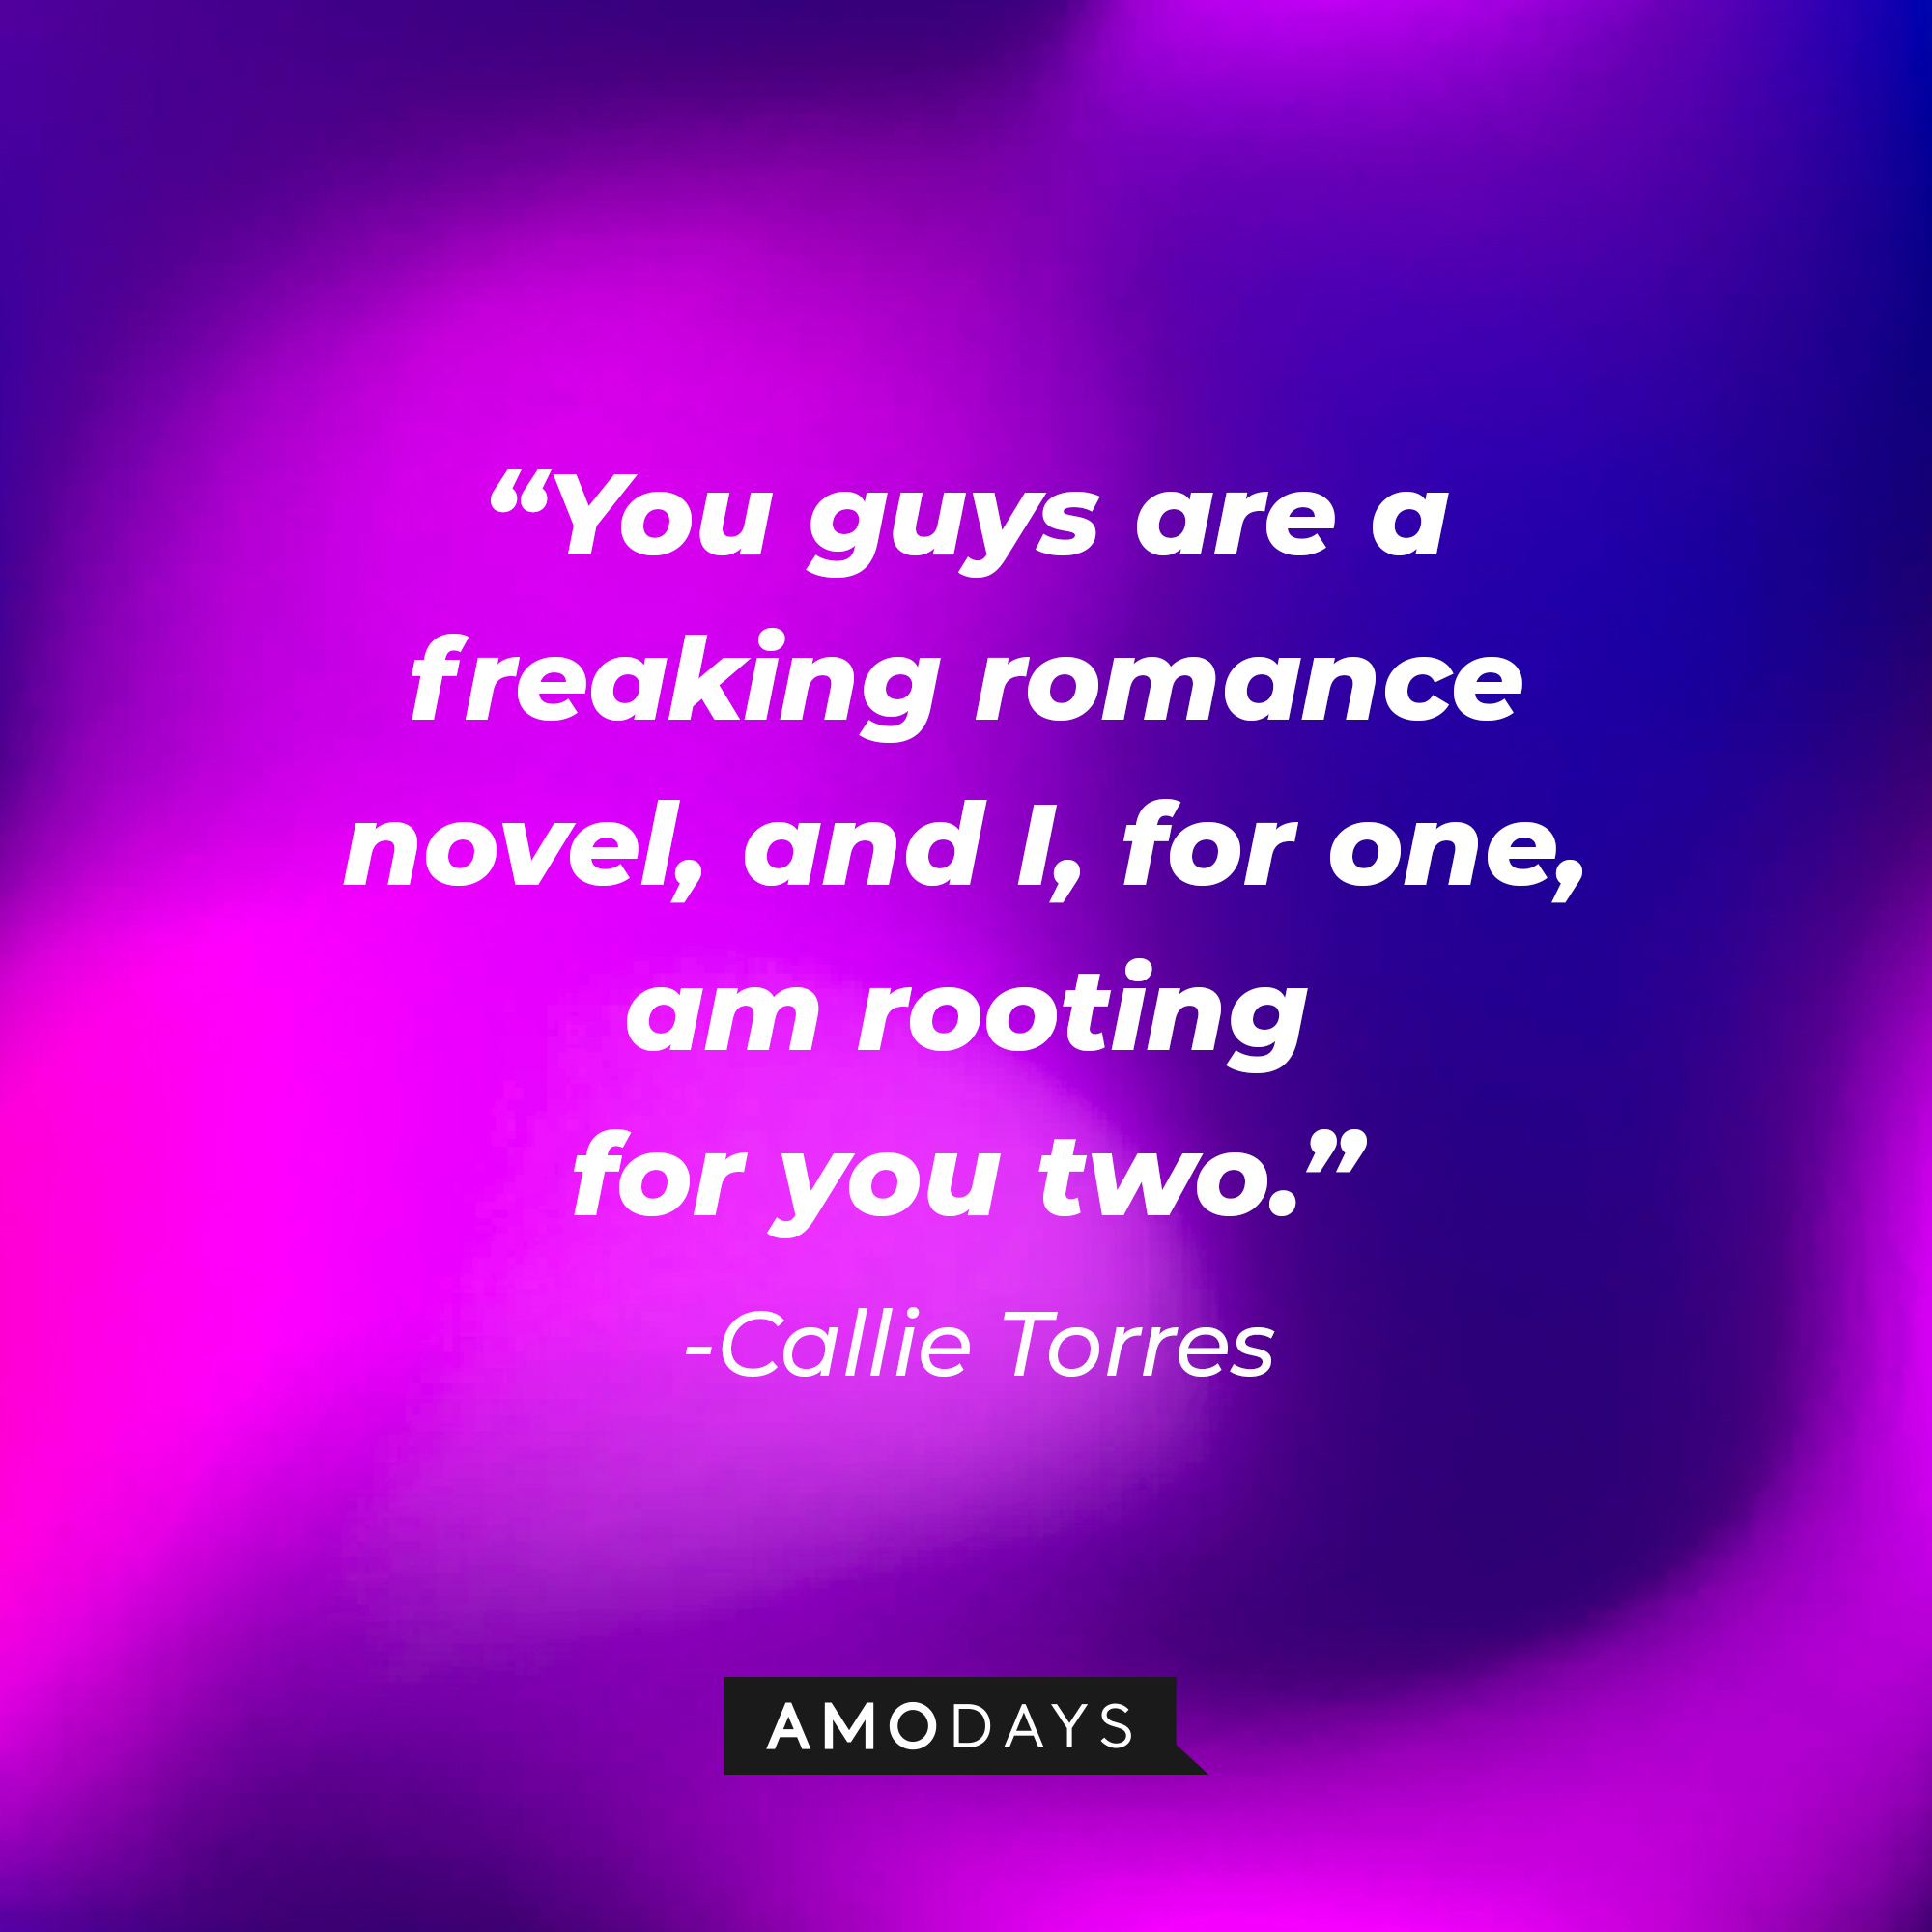 Callie Torres’ quote: "You guys are a freaking romance novel, and I, for one, am rooting for you two.” | Source: youtube.com/ABCNetwork